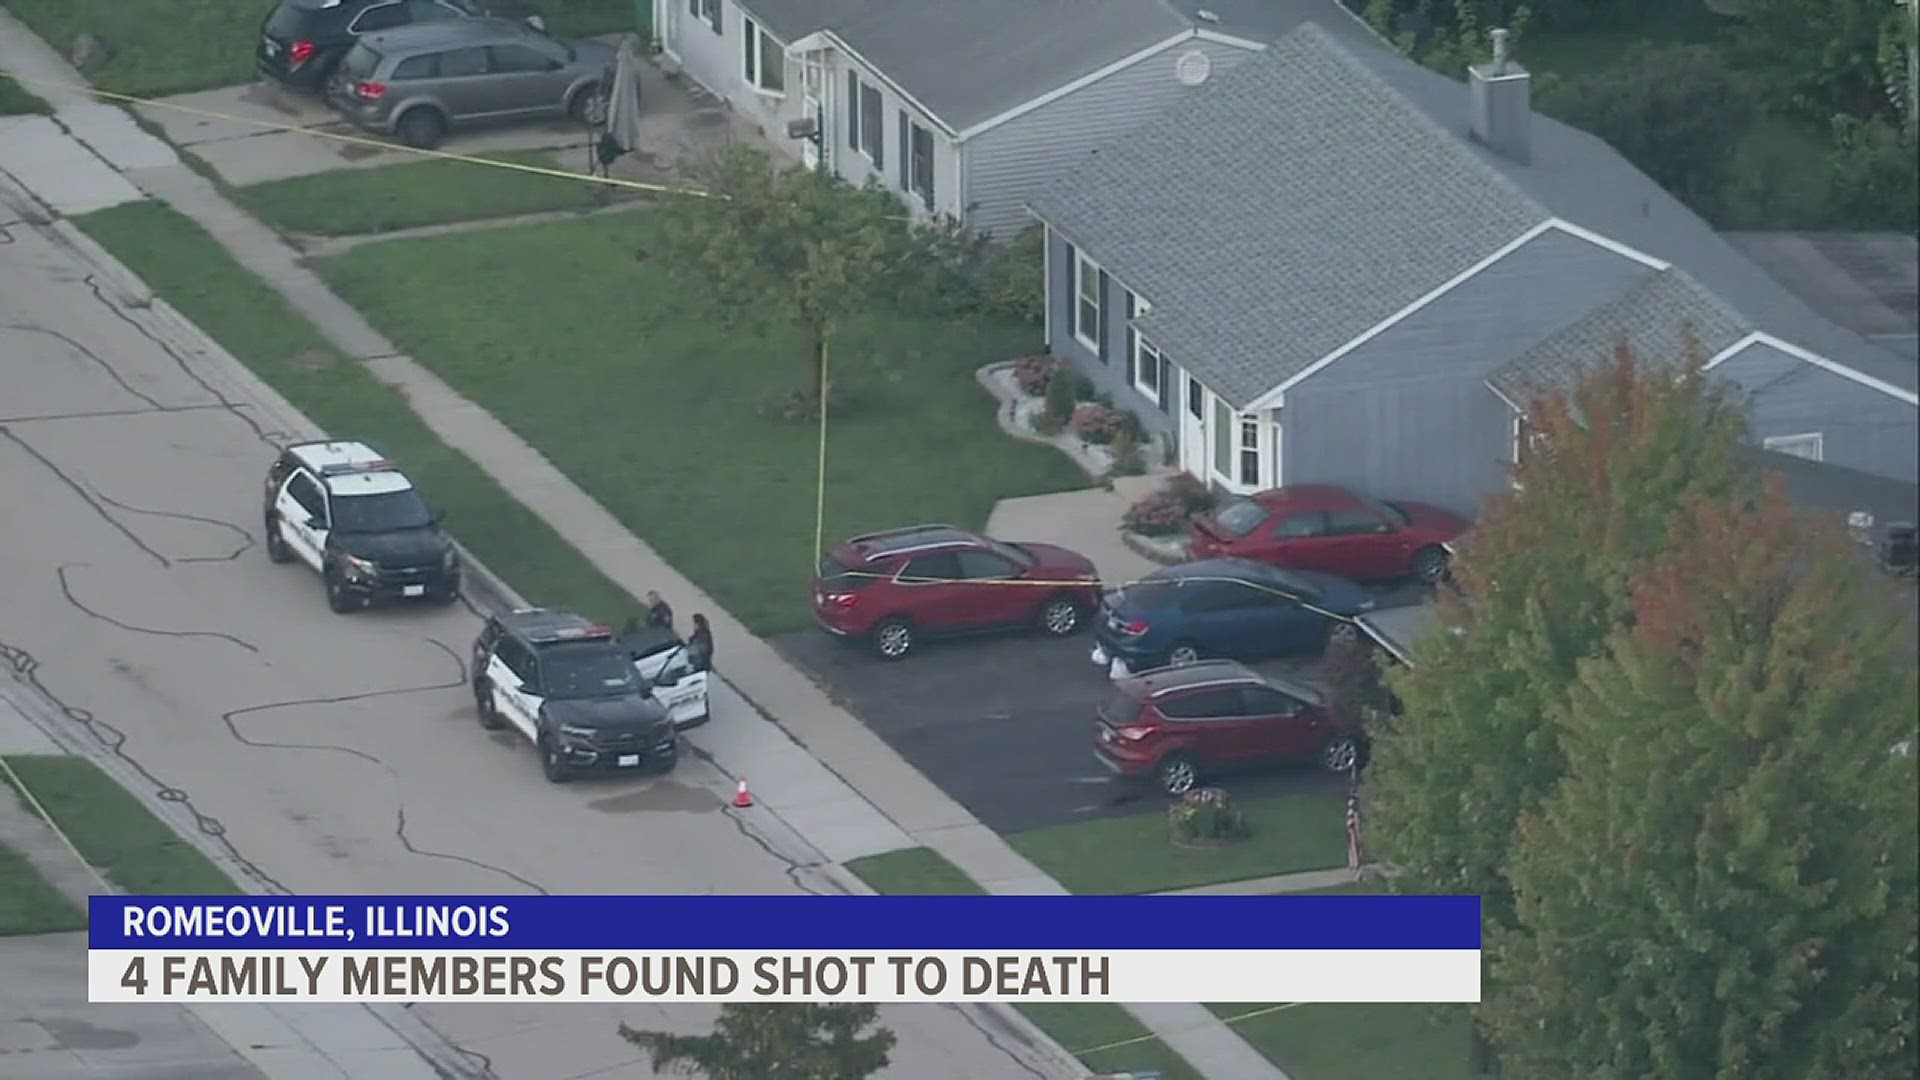 Two adults, two children and three dogs were shot to death.